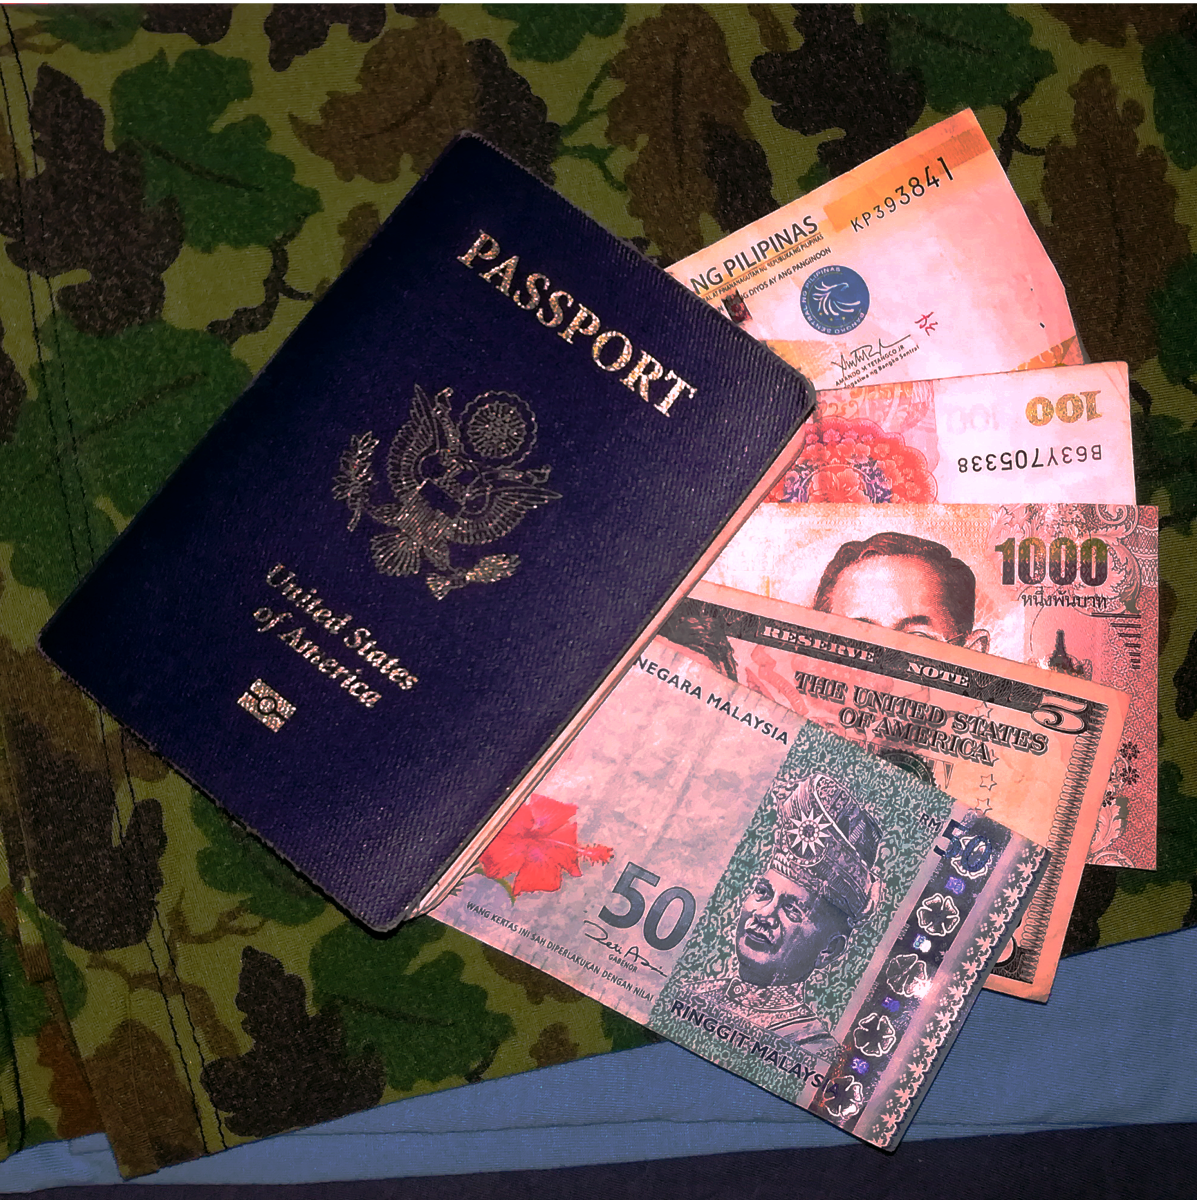 Read on for some tips on how to begin your life overseas.